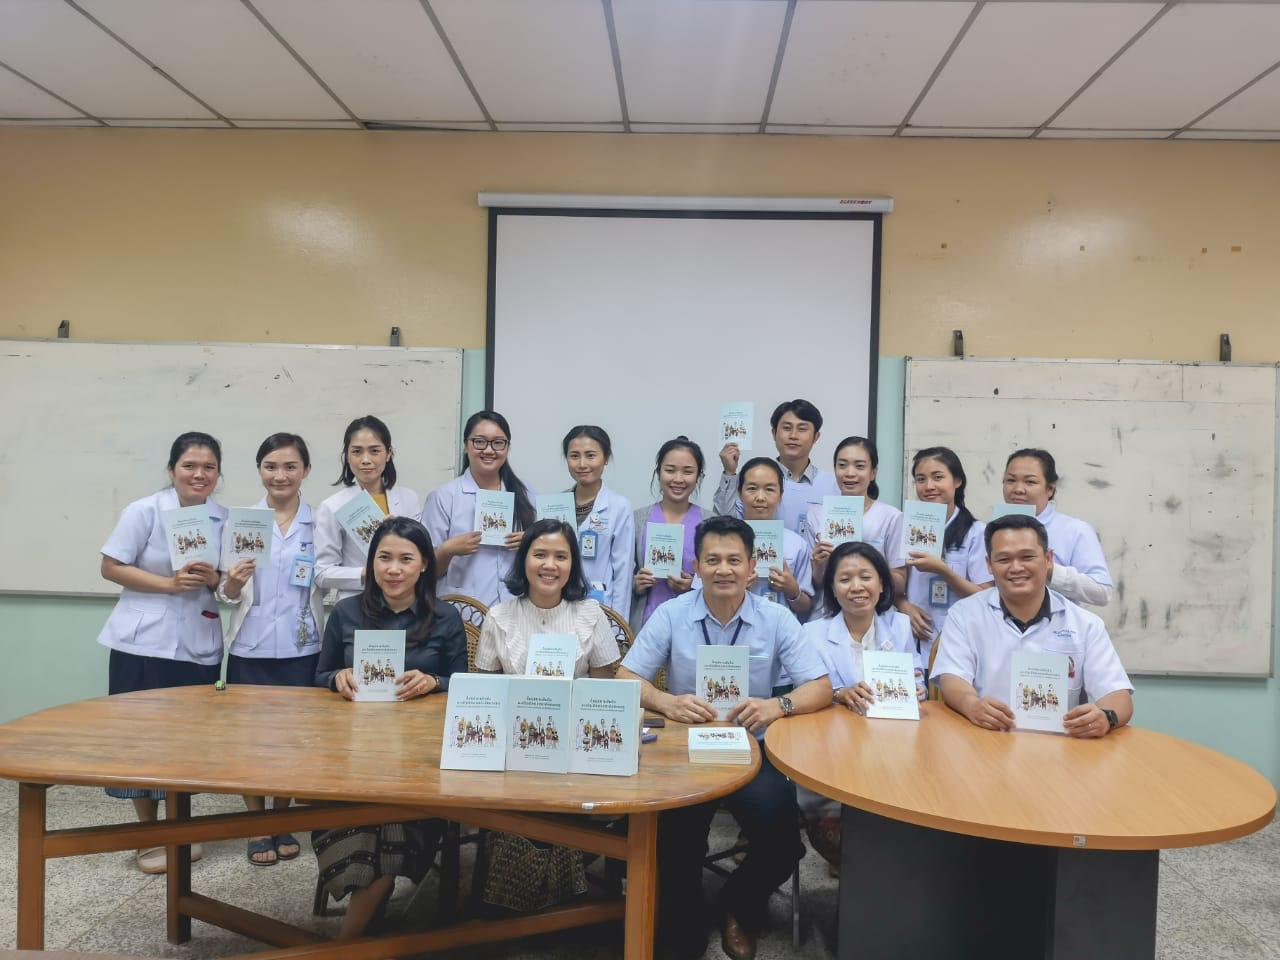 Books of '' Supportive Care Guideline in Childhood Cancer '' were donated to all year level of Pediatric Resident Students